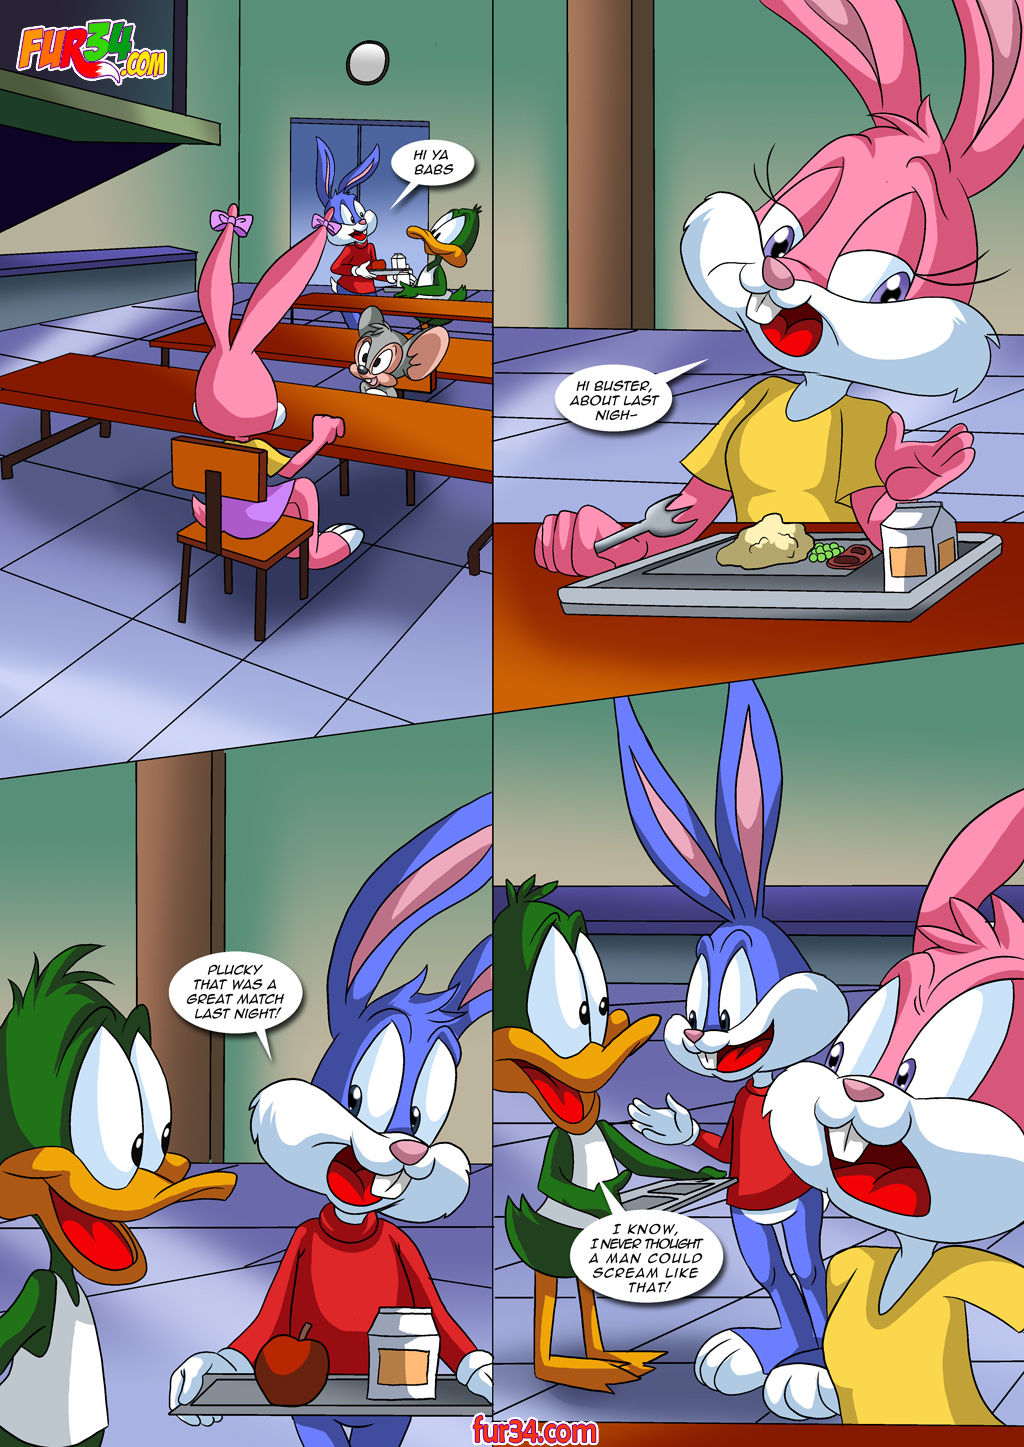 Toon Striptease - Stripper Babs [Complete!] -Tiny Toons - FreeAdultComix